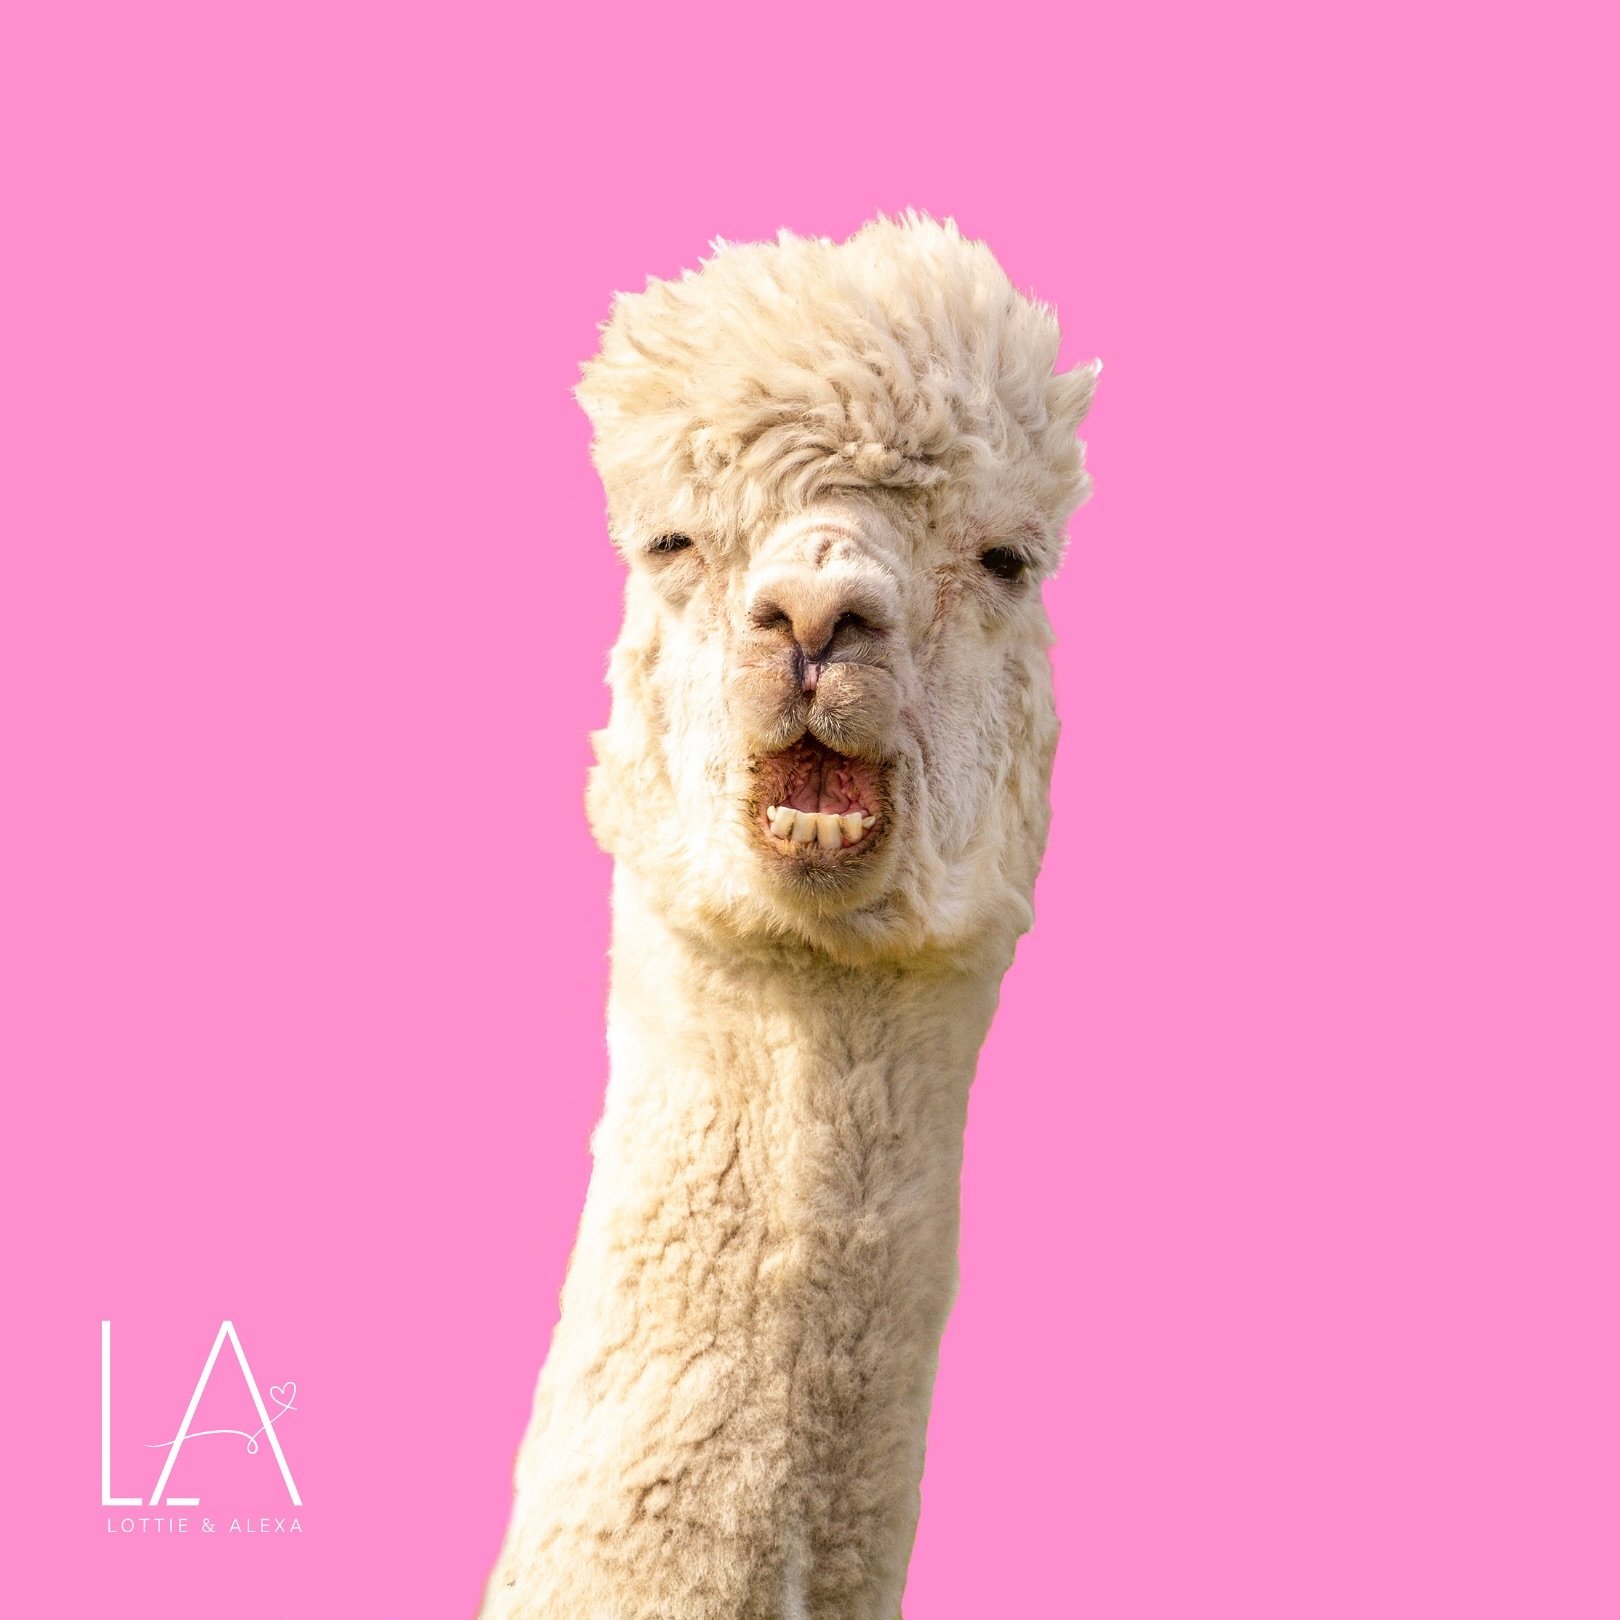 Sound the Lama Lama - Monday&rsquo;s coming! Hope you all had a great weekend!! One week closer to us going live.